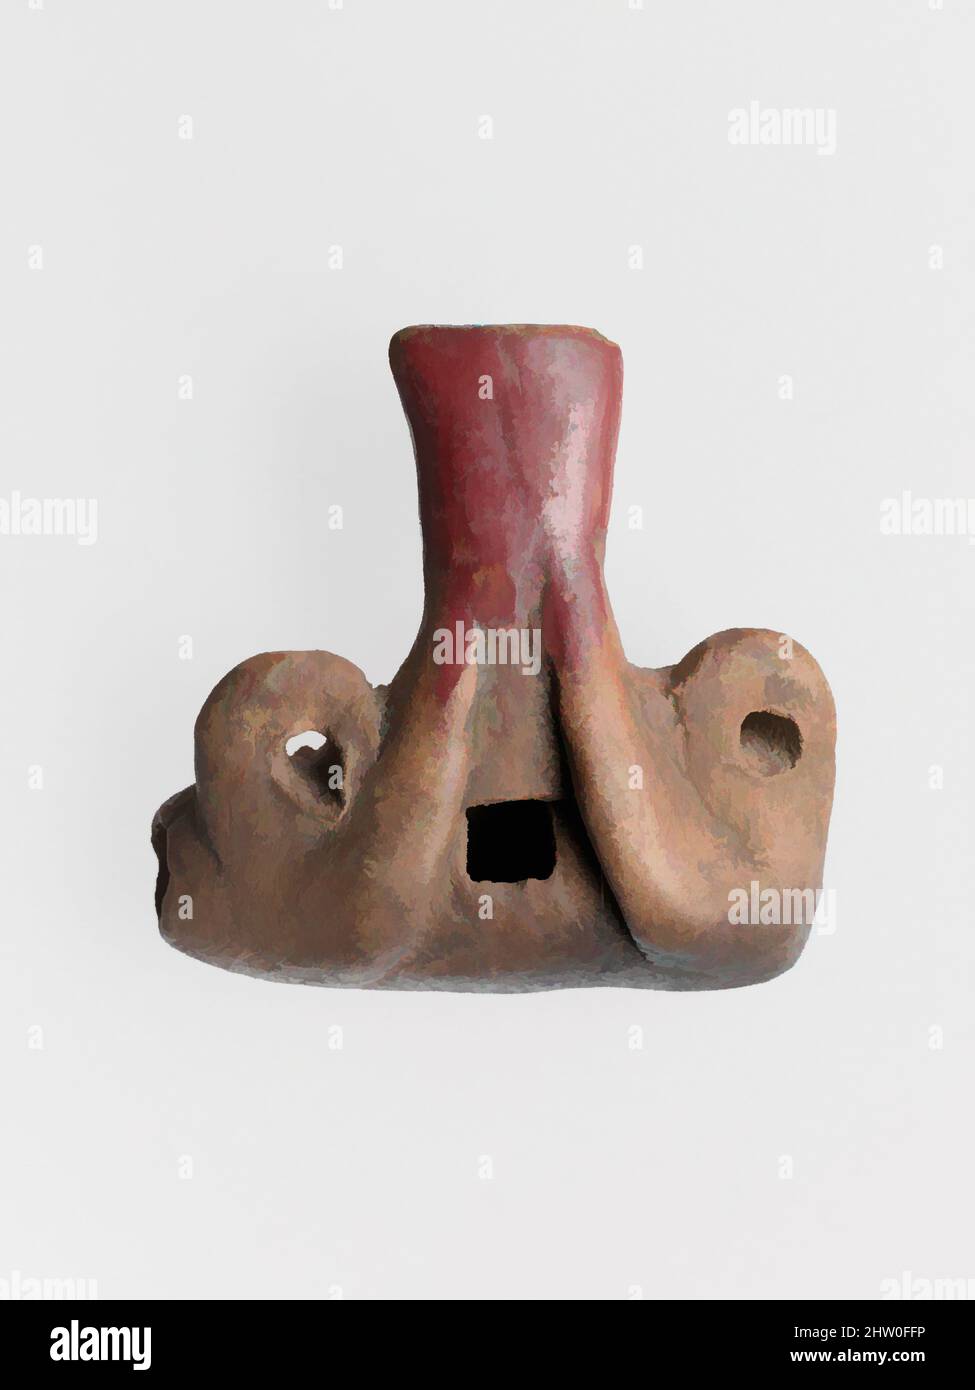 Art inspired by Pottery Whistle, Pre-Columbian, ca. 900–1500, San Sebastian, Texcoco, Mexico, Mexican, Clay, Aerophone-Whistle Flute-whistle, Classic works modernized by Artotop with a splash of modernity. Shapes, color and value, eye-catching visual impact on art. Emotions through freedom of artworks in a contemporary way. A timeless message pursuing a wildly creative new direction. Artists turning to the digital medium and creating the Artotop NFT Stock Photo